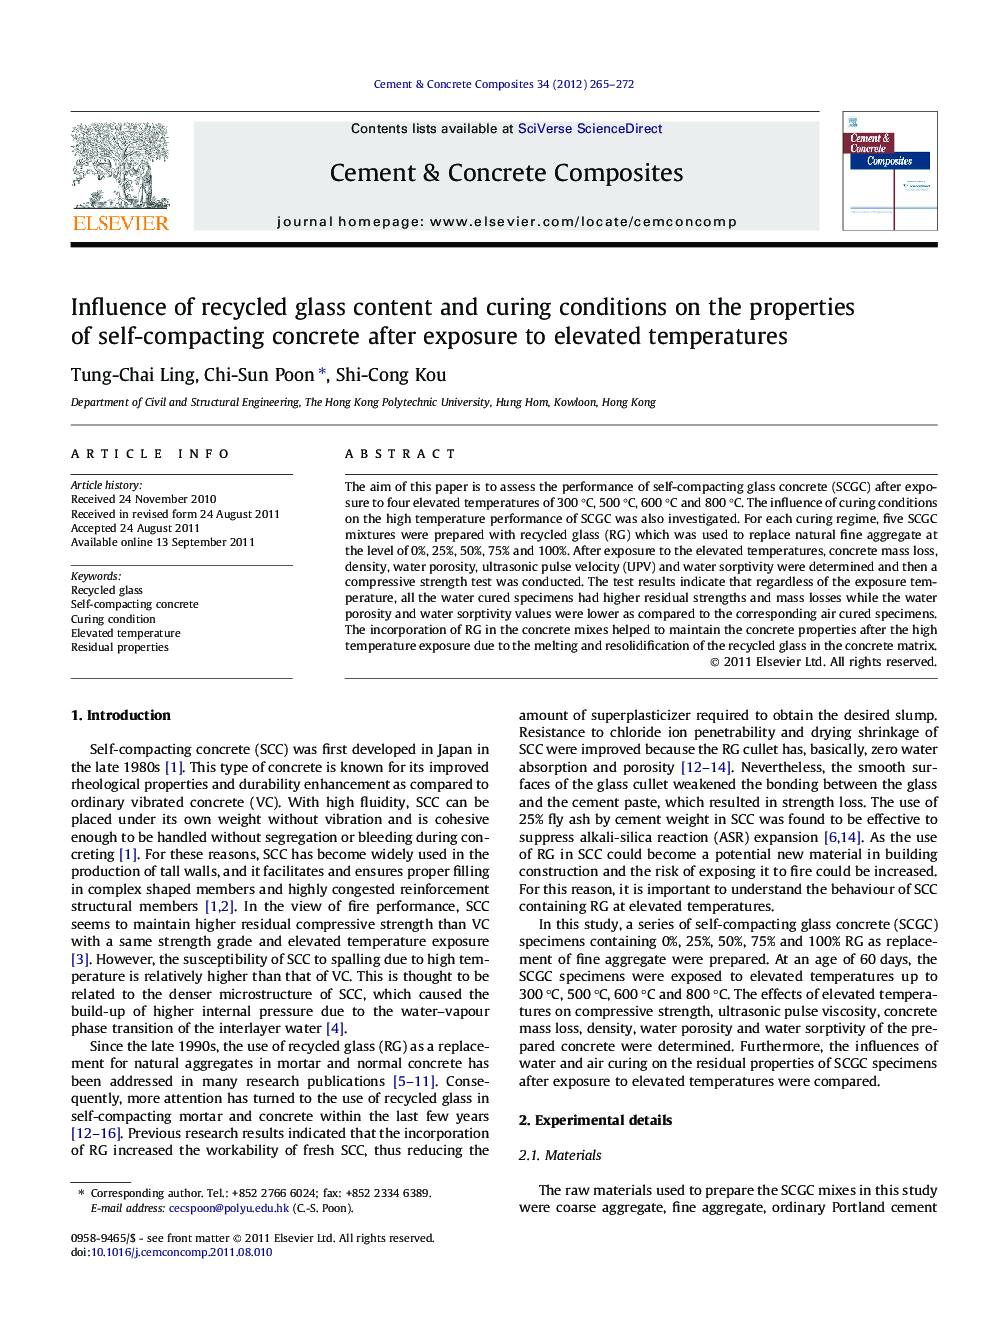 Influence of recycled glass content and curing conditions on the properties of self-compacting concrete after exposure to elevated temperatures